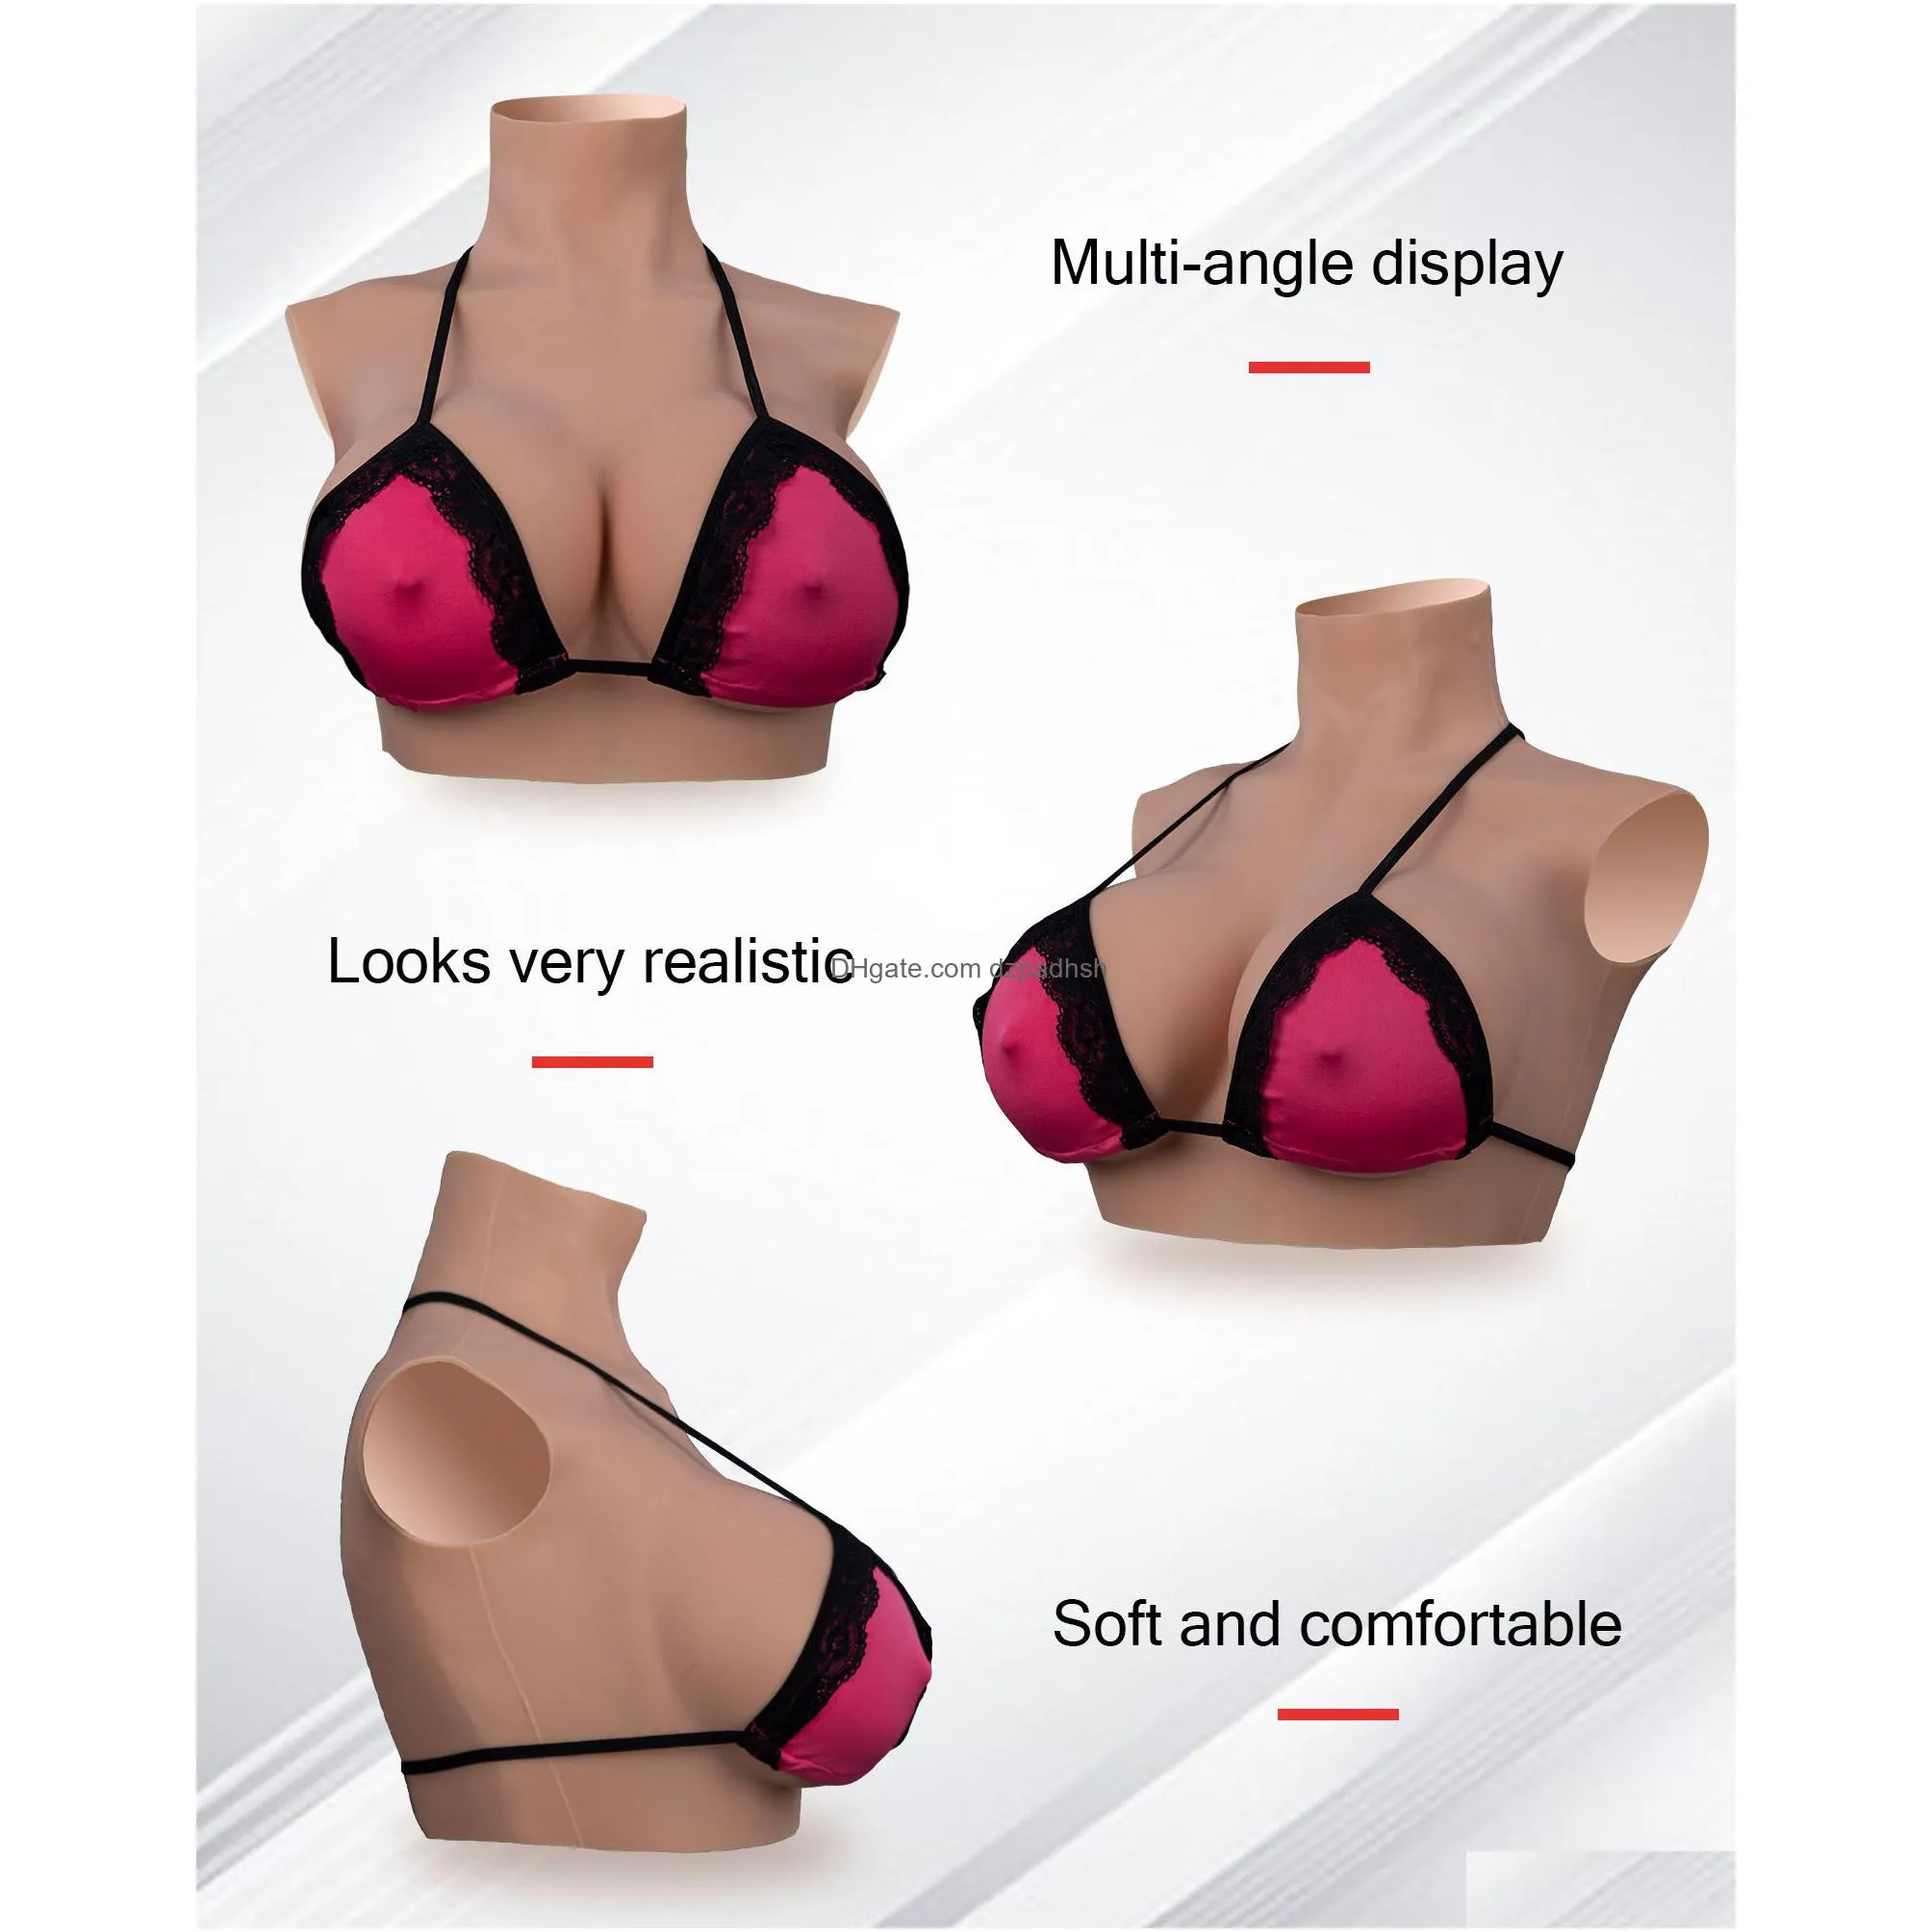 fake boobs fake breasts high collar breastplate b-g cup silicone breasts forms for crossdressers breast plates